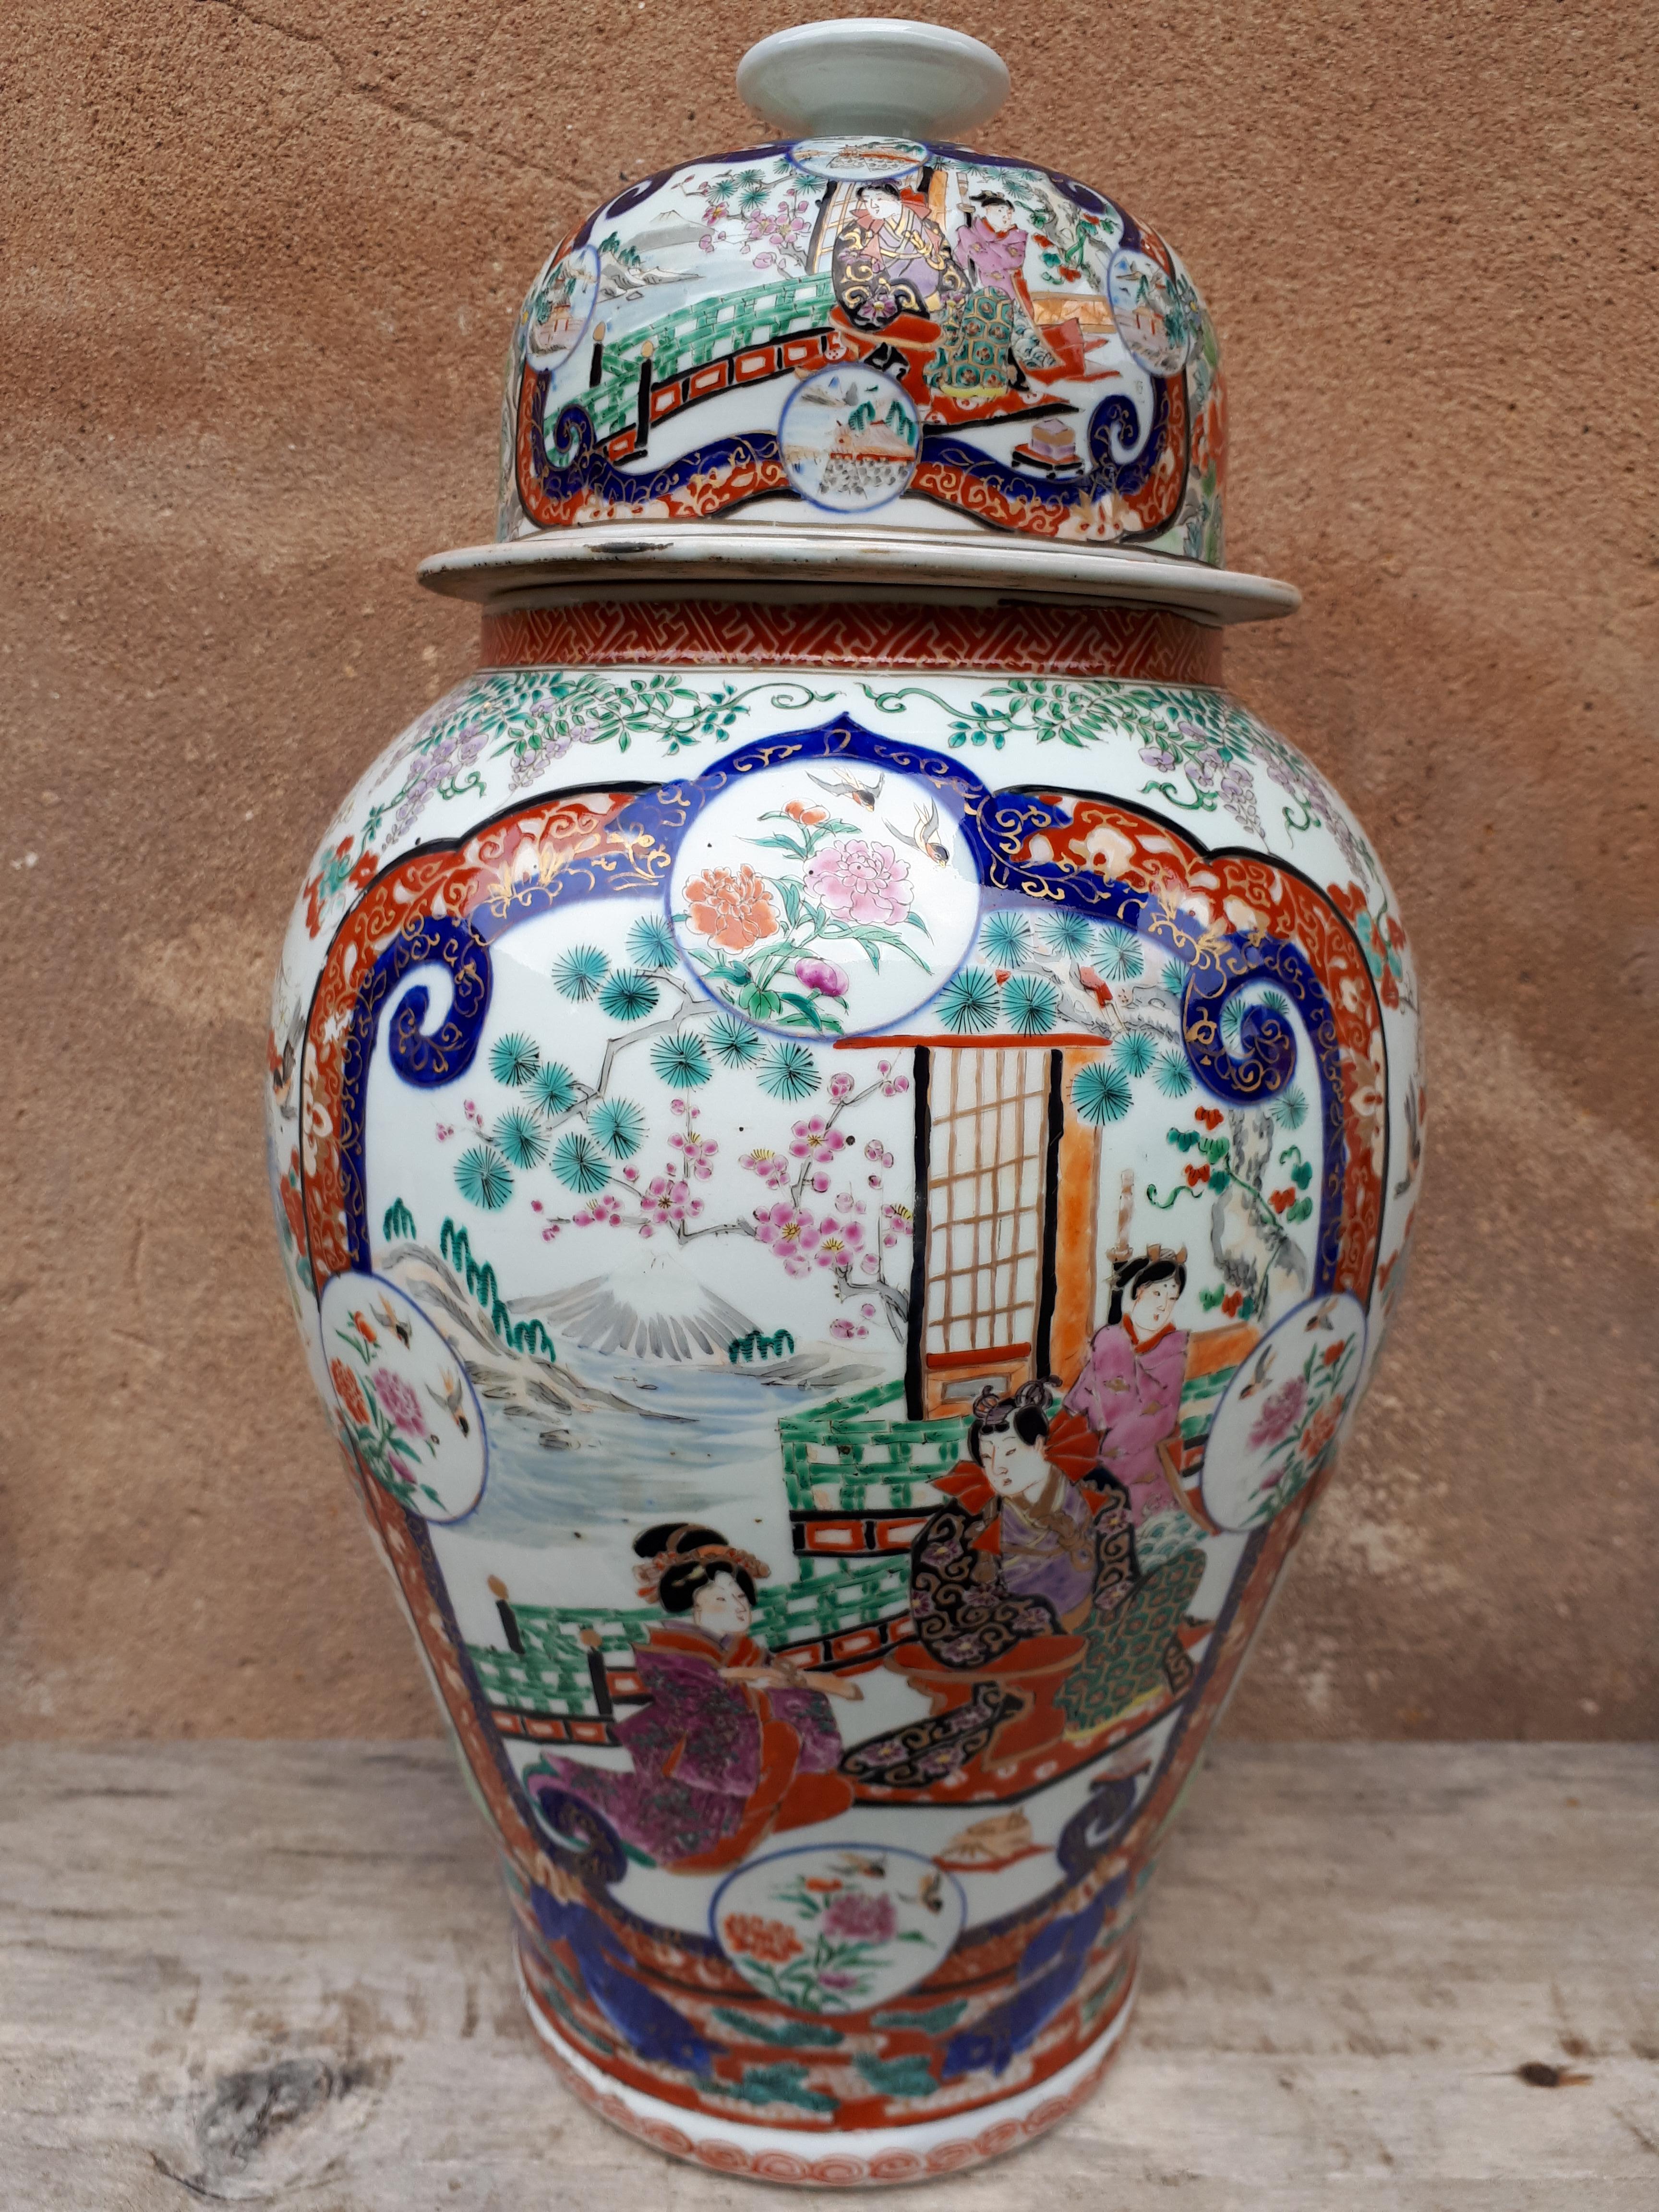 Extraordinary pair of Arita porcelain vases with blue, coral and polychrome decoration, with gold highlights, of court scenes and floral landscapes. A restored cover and a chip on a heel, otherwise superb condition (bright colors and beautiful